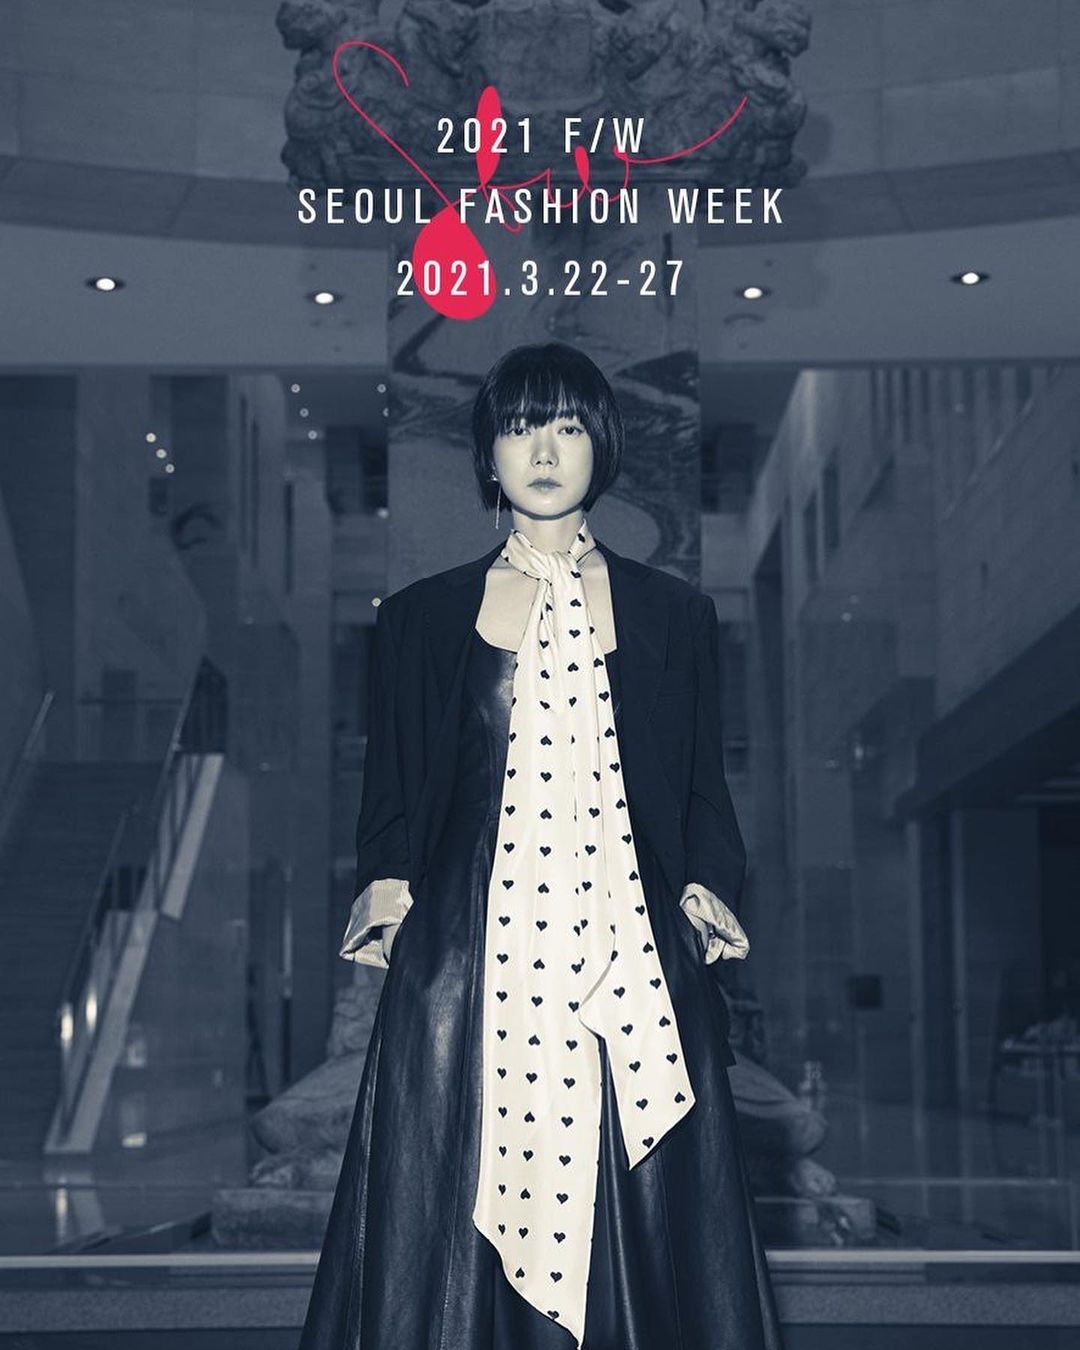 Bae Doona: Clothes, Outfits, Brands, Style and Looks